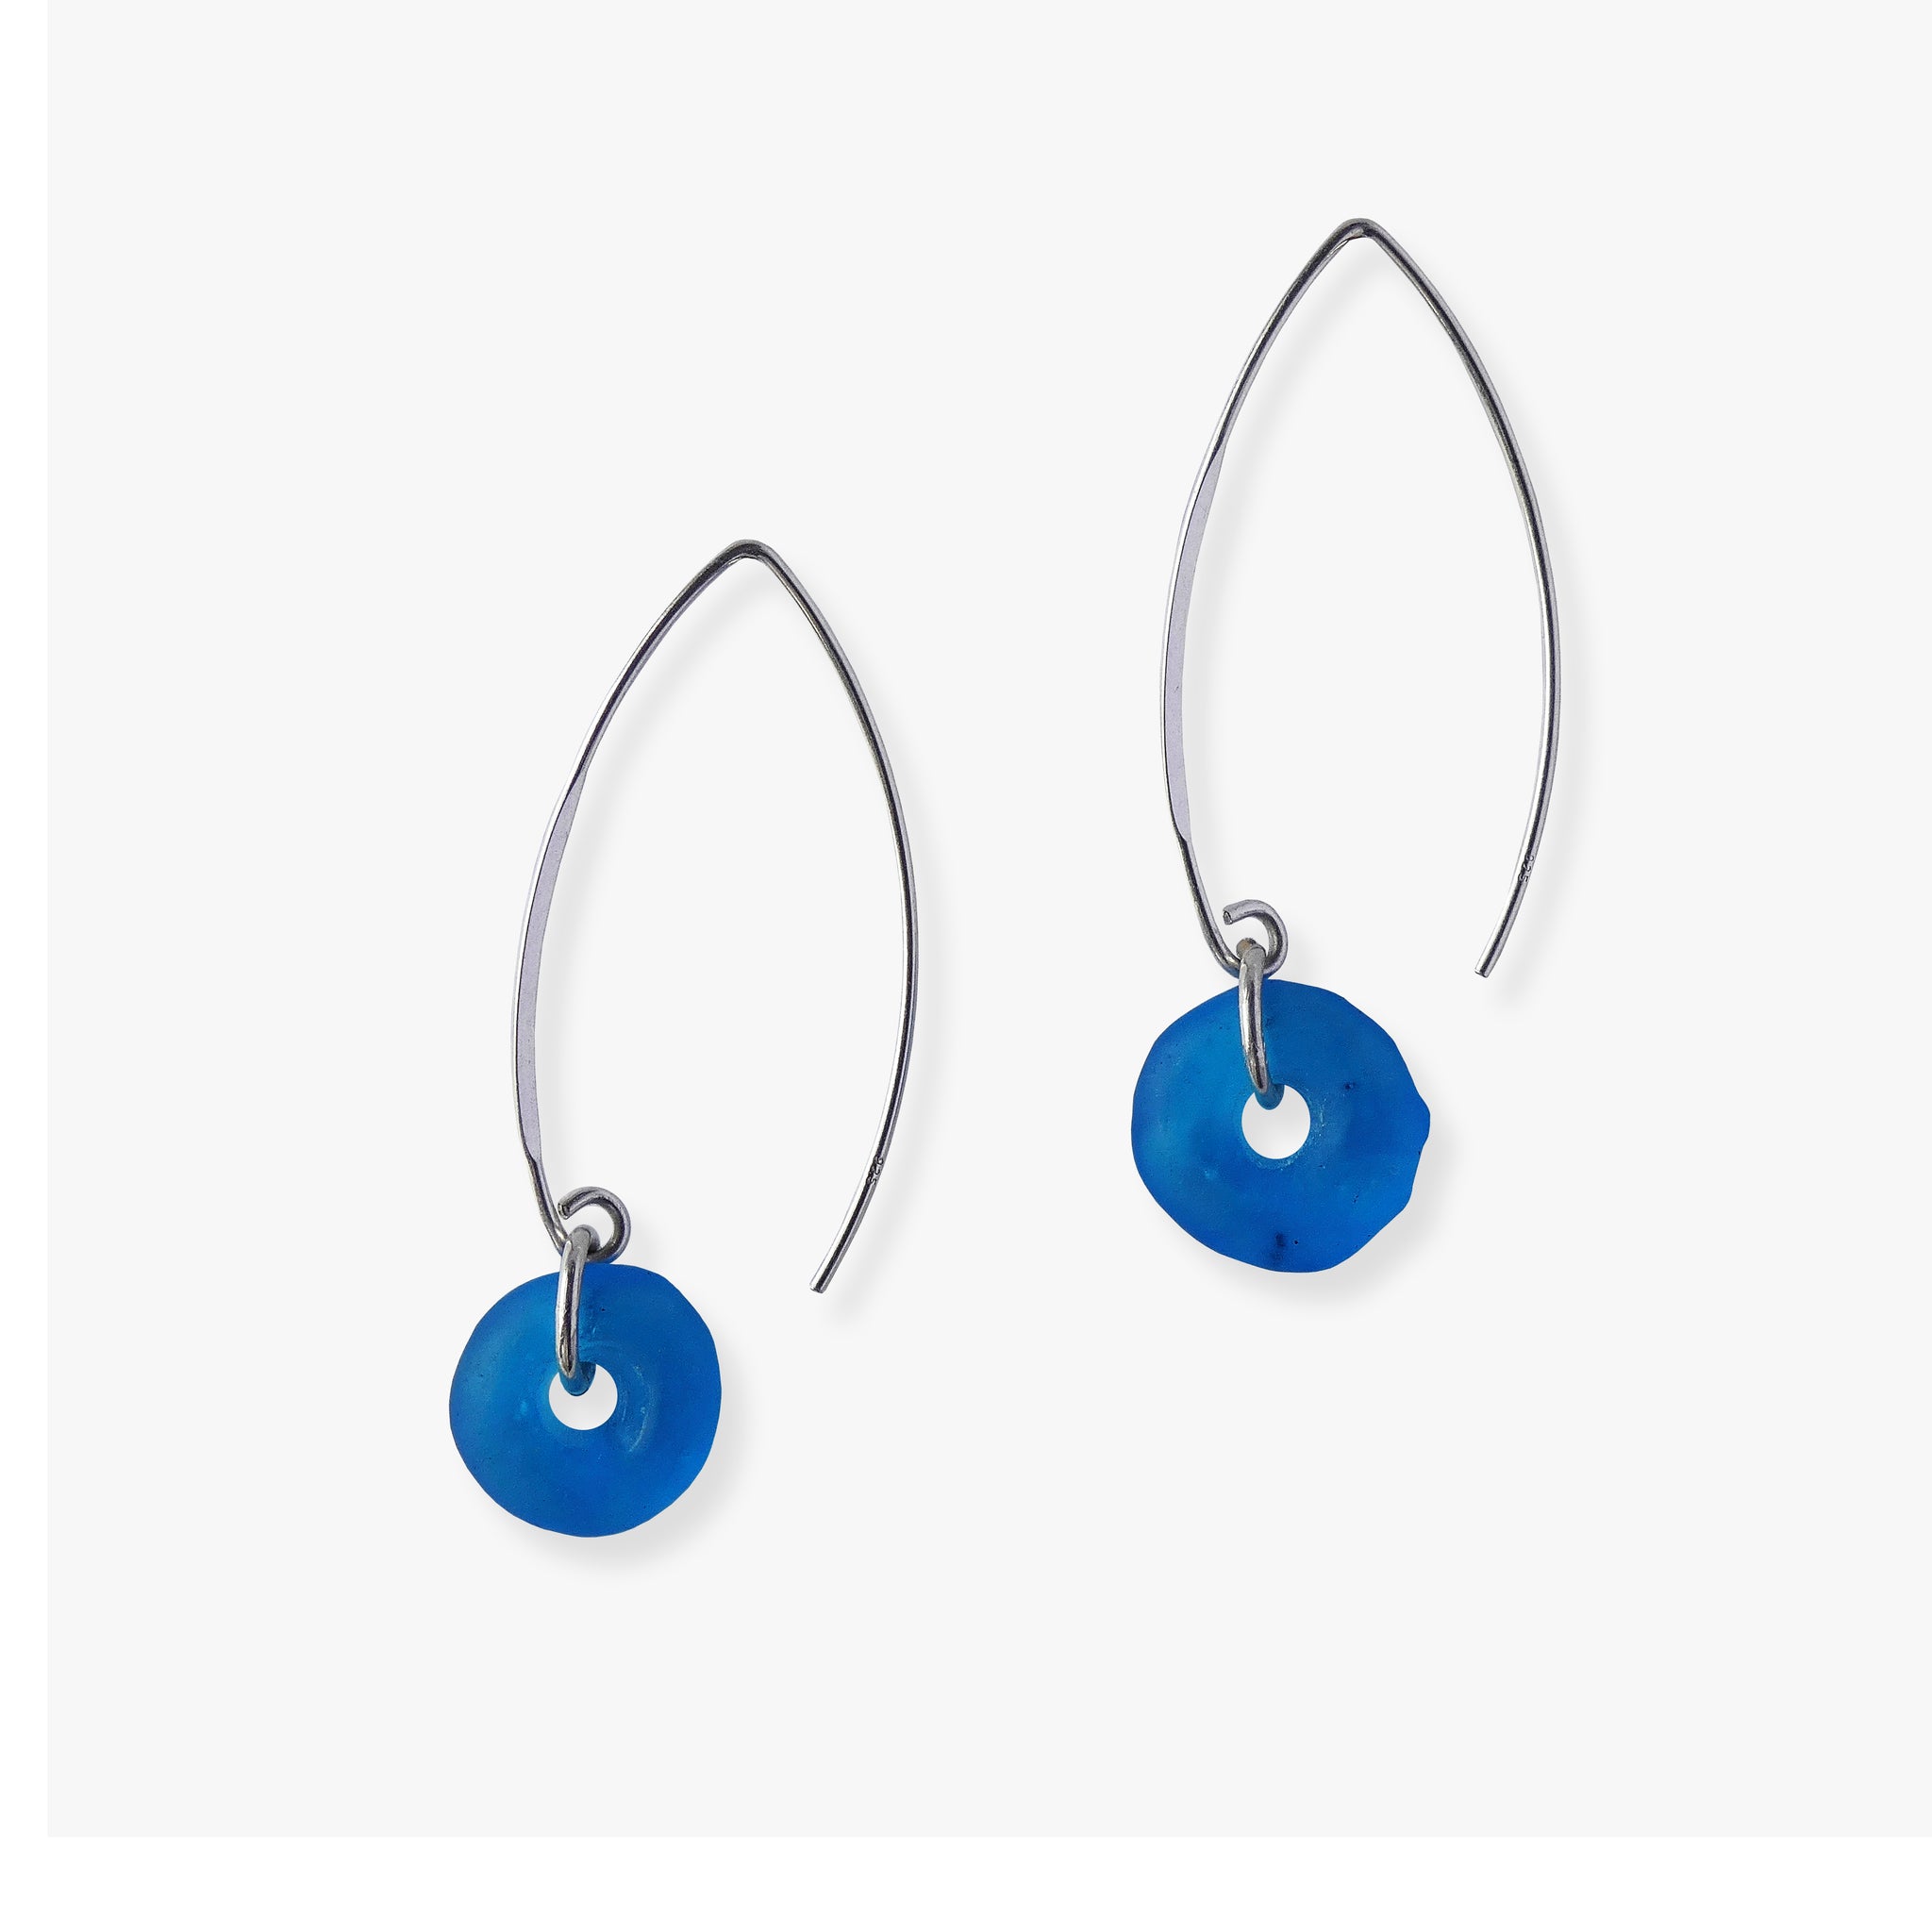 mmi3nsa sterling silver earrings with pale blue beads.png